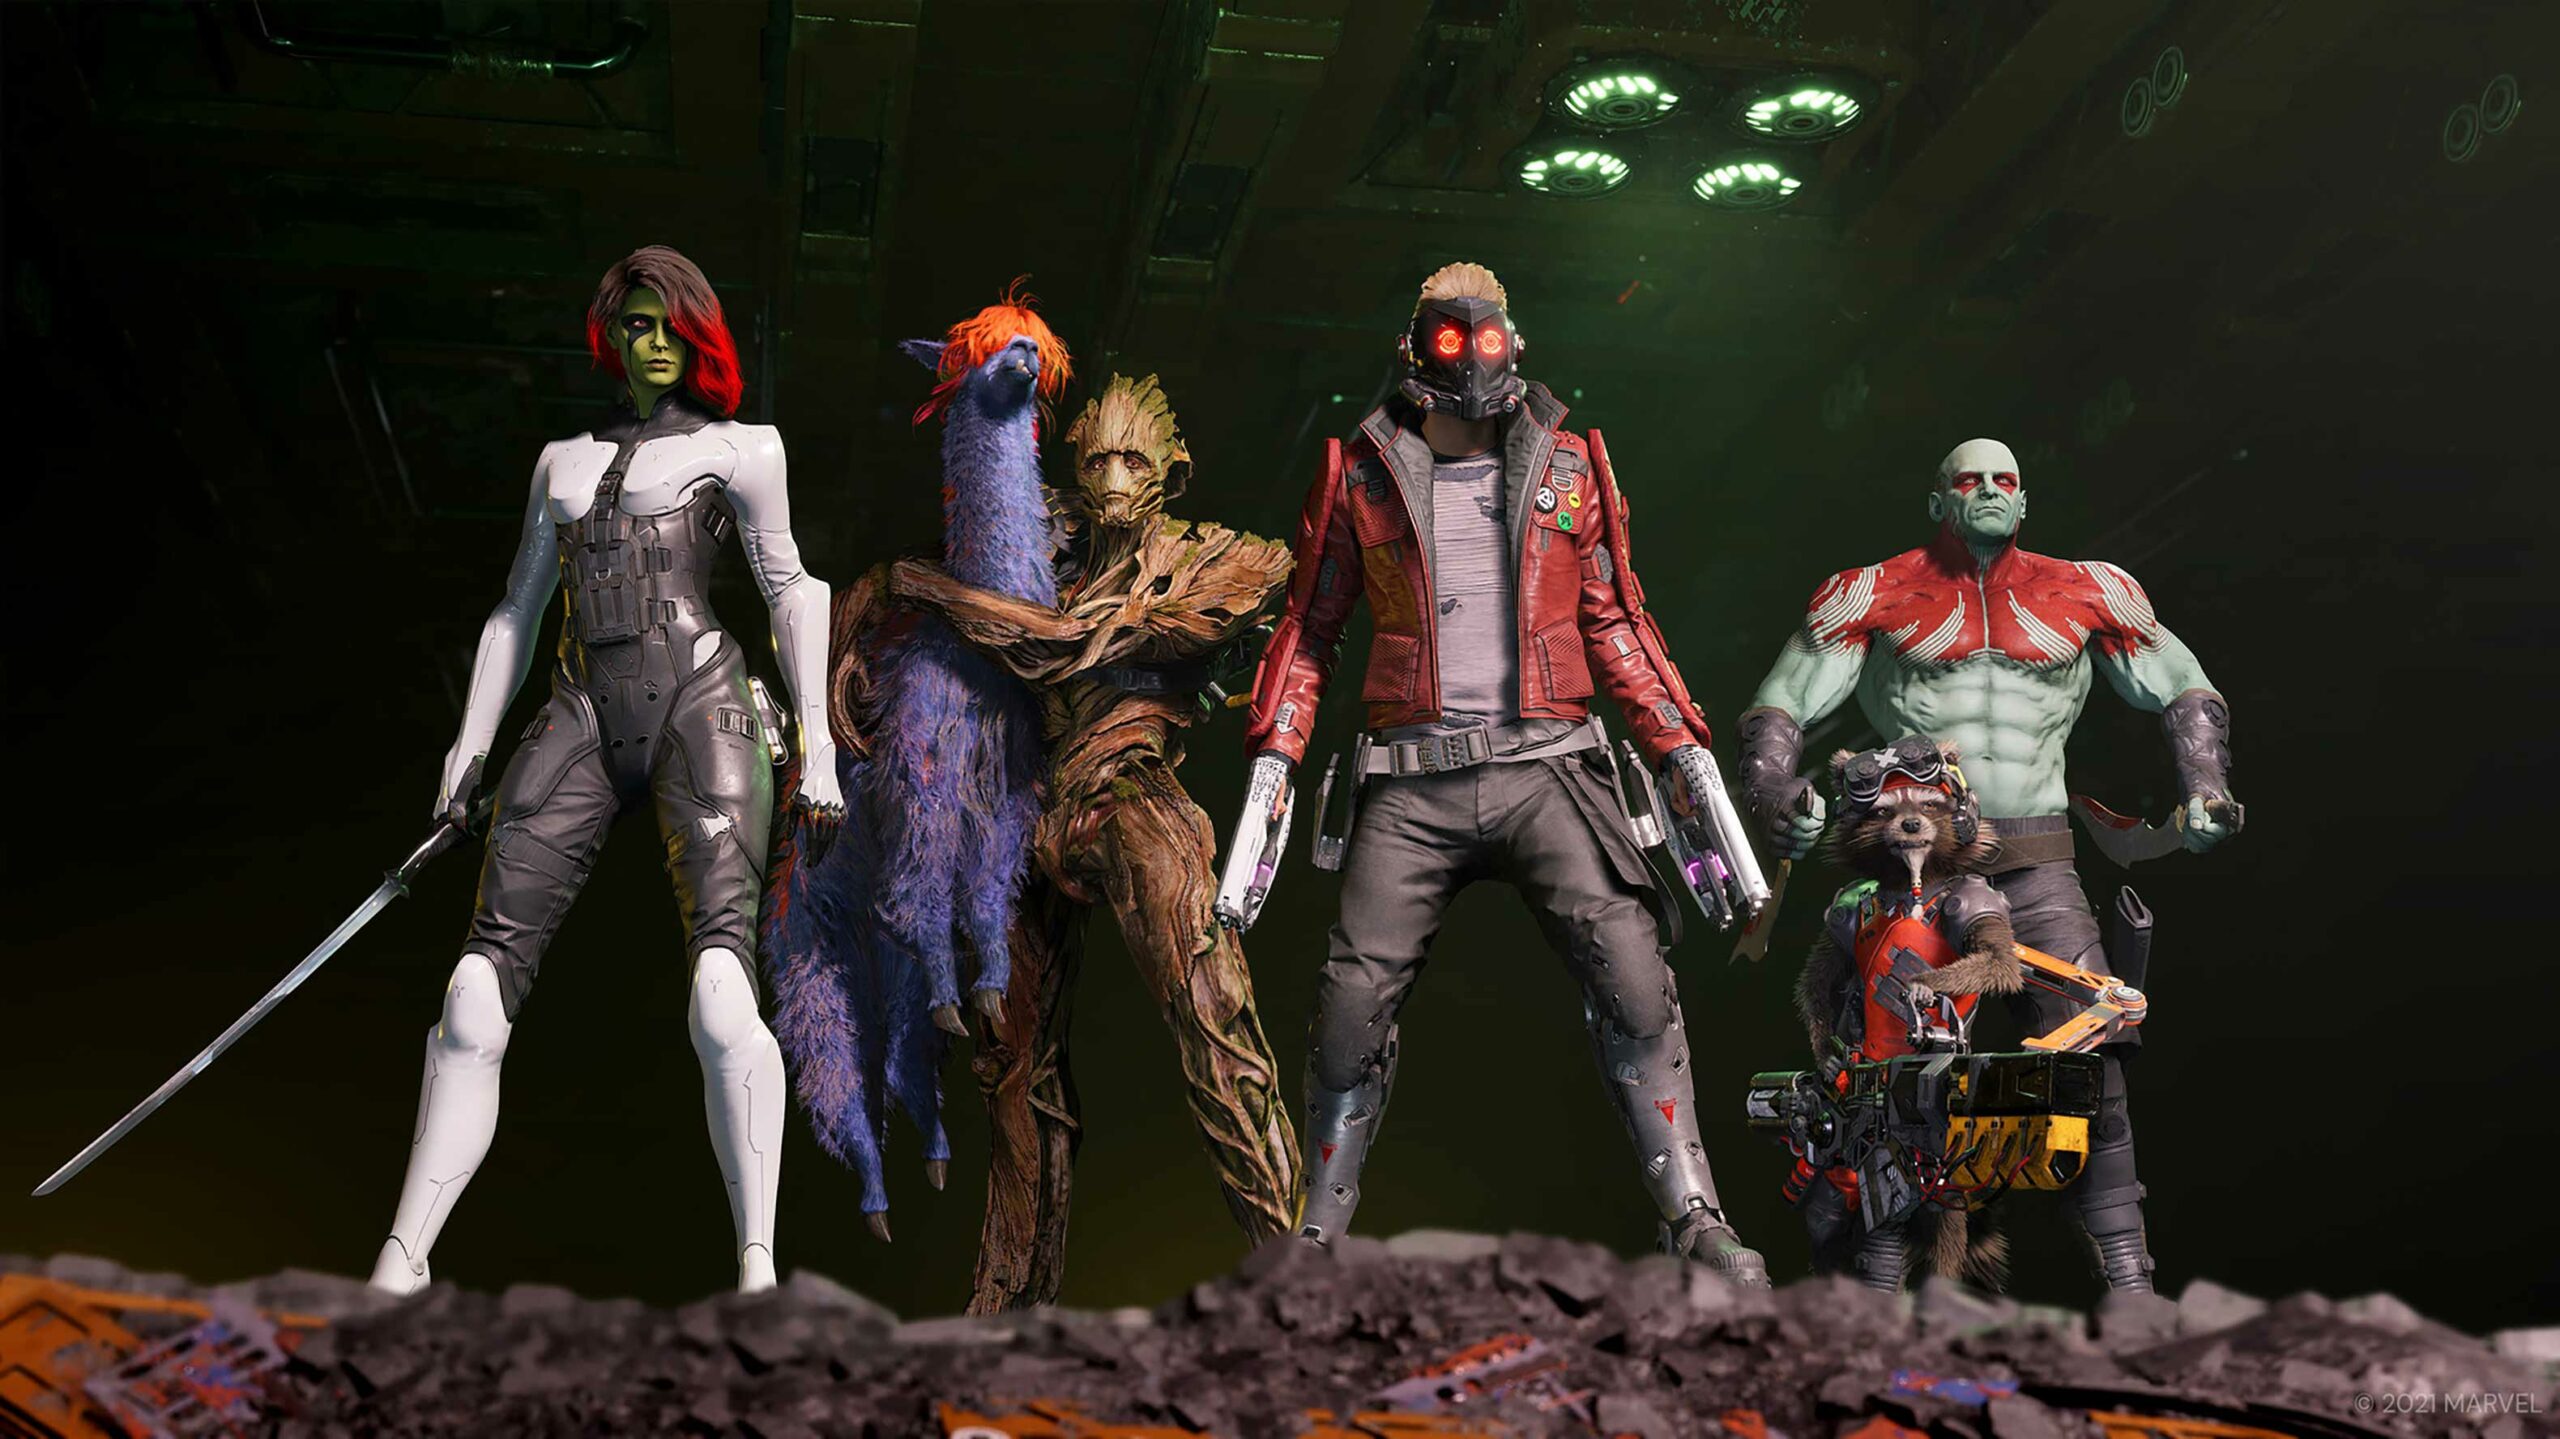 The Guardians of the Galaxy stand tall -- from left to right, Gamora, Groot with llama, Star-Lord, Rocket and Drax)